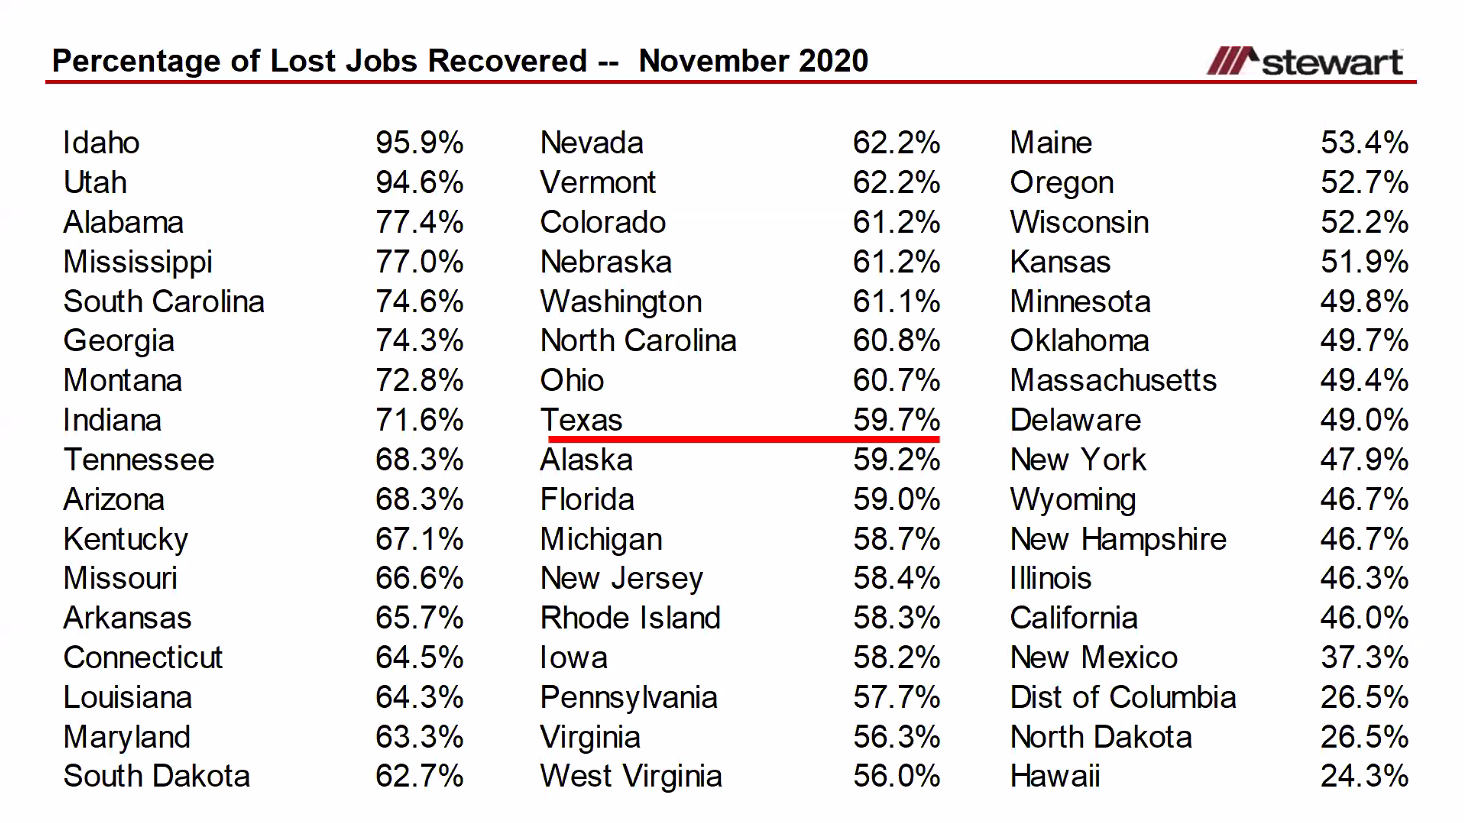 Texas job losses and recoveries